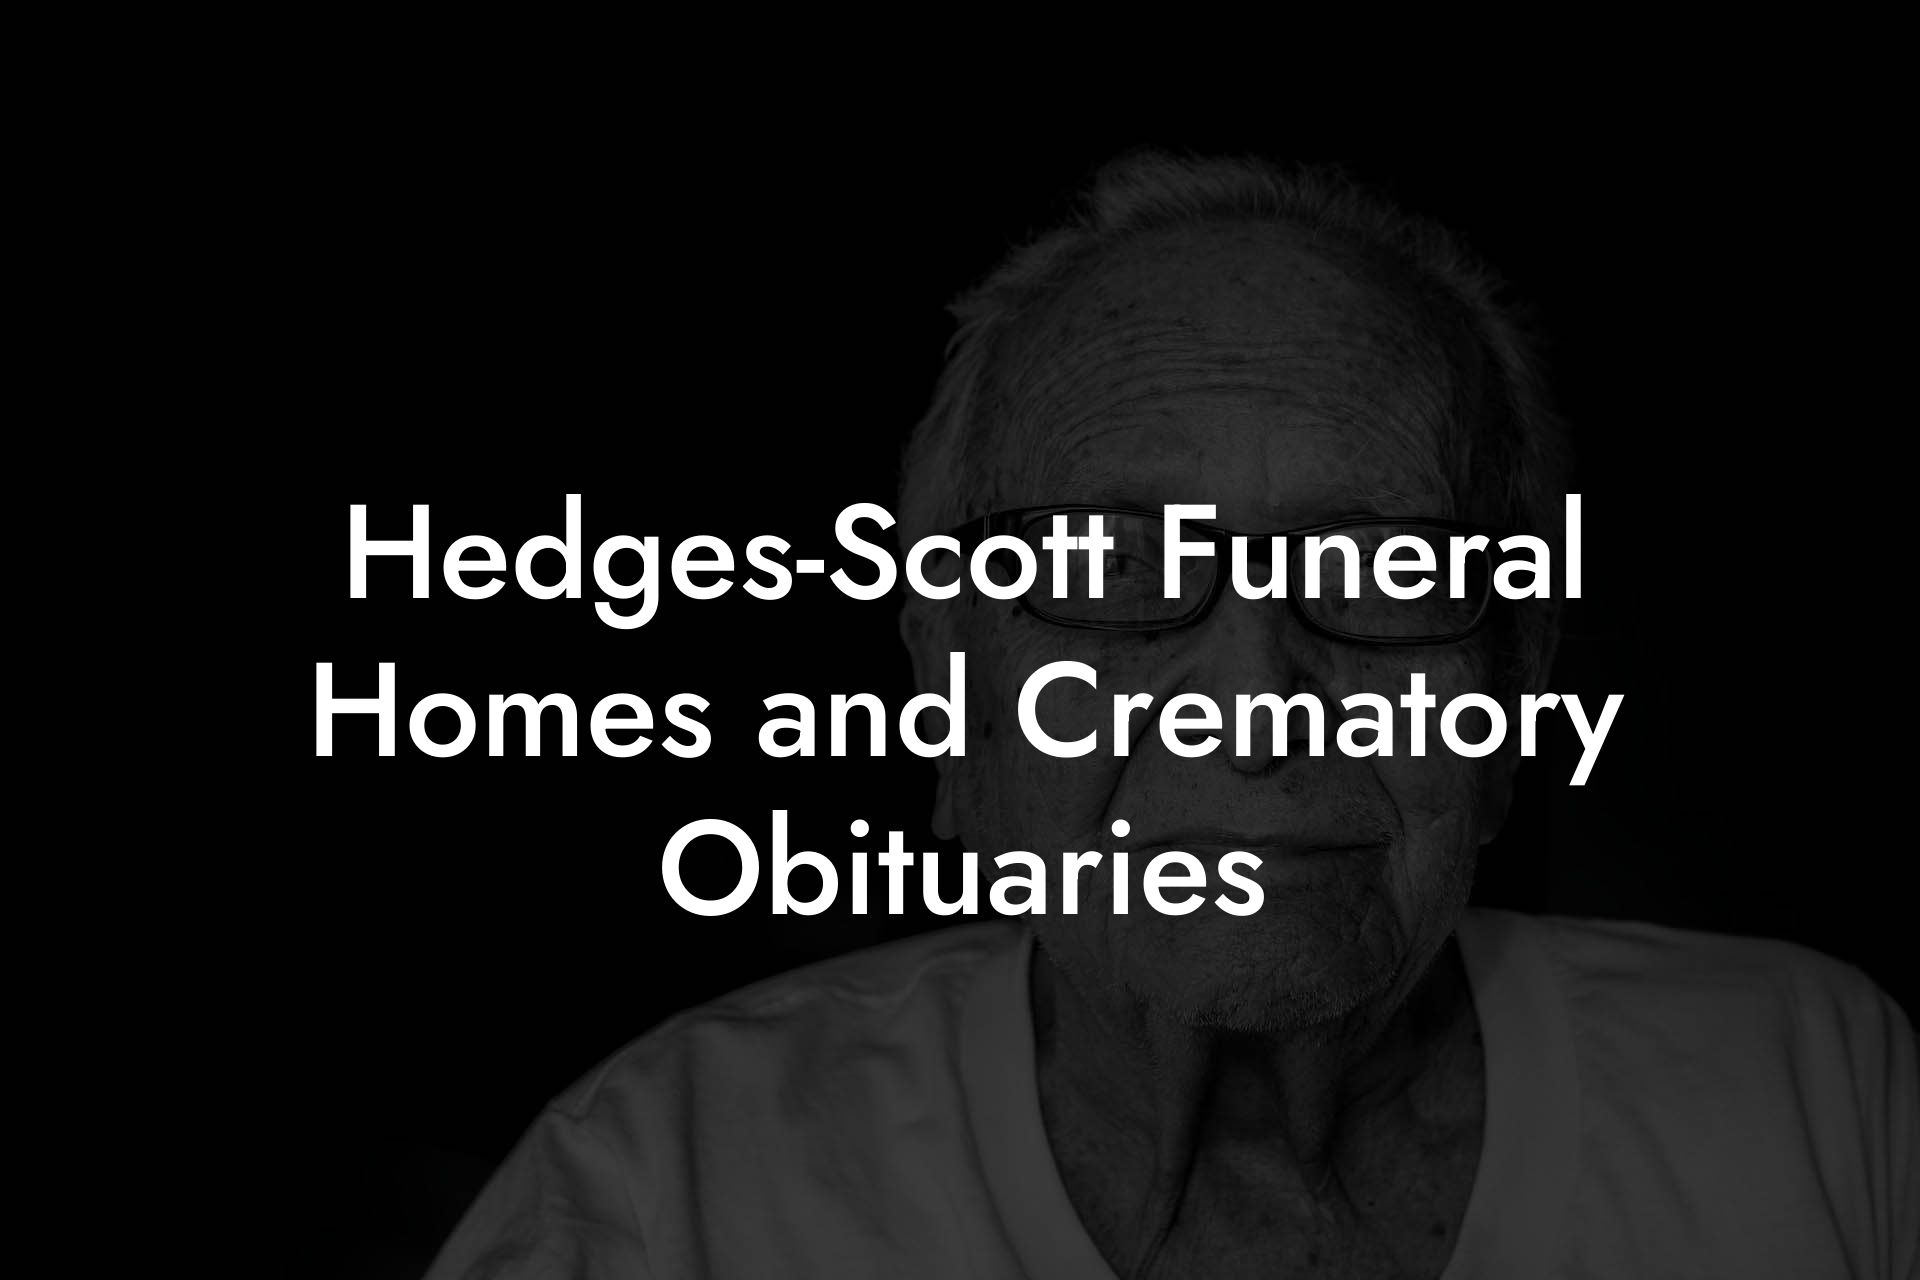 Hedges-Scott Funeral Homes and Crematory Obituaries